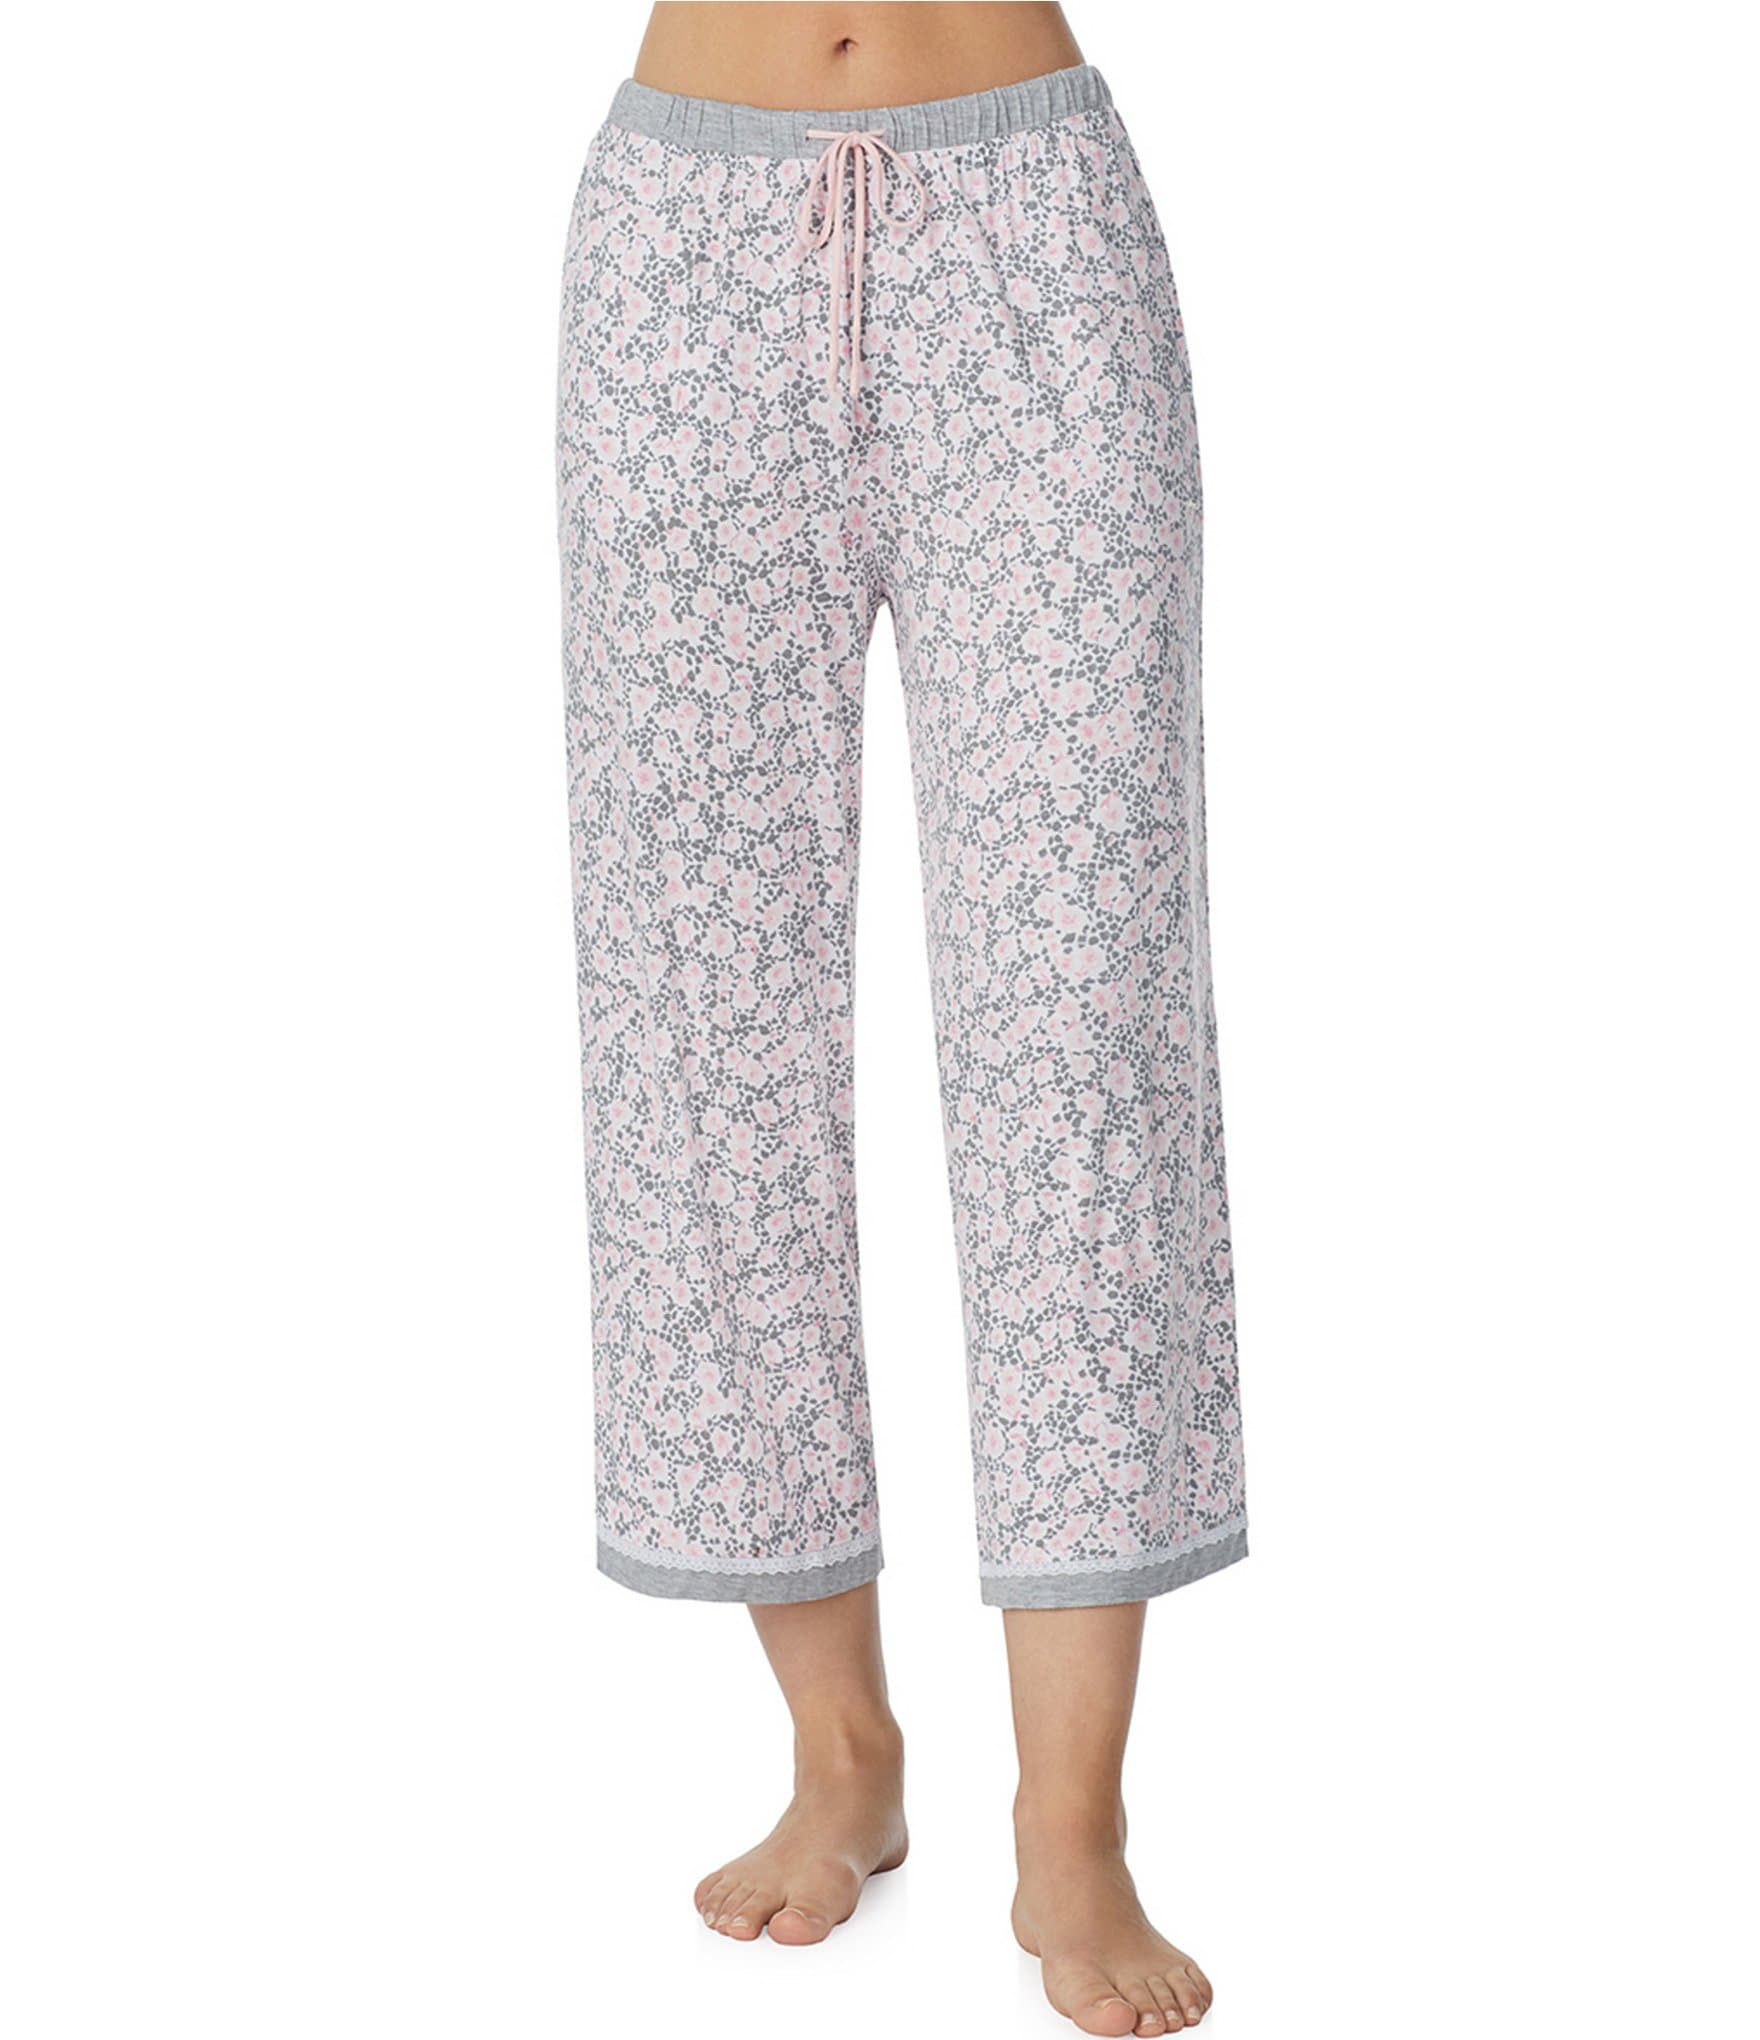 Soft Jersey Fitted Capri - Ditsy floral